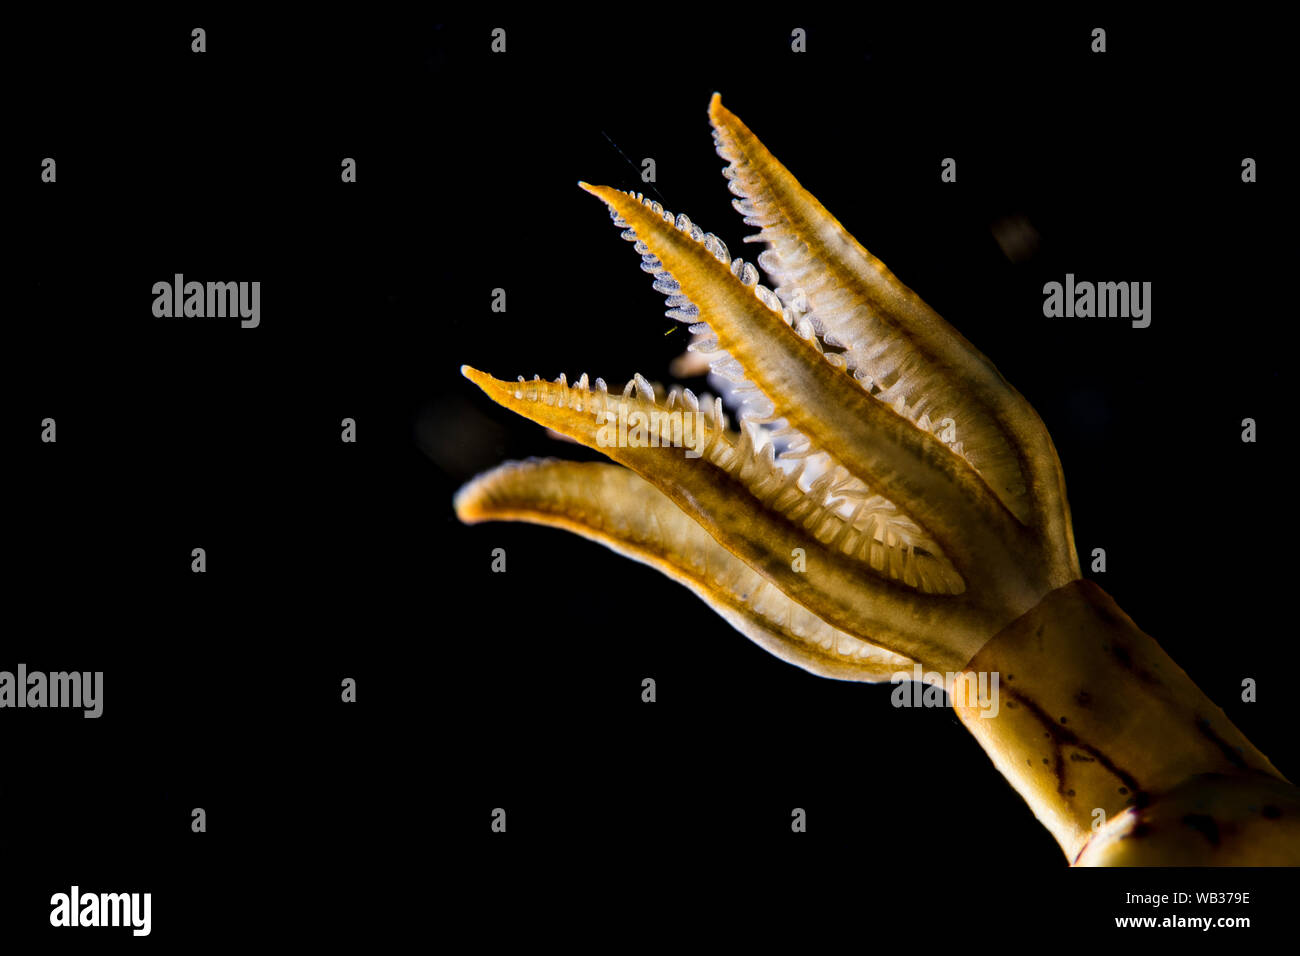 A Dorid Nudibranch's Hills Lit from the Side with Black brackground, Anilao Philippines Stock Photo